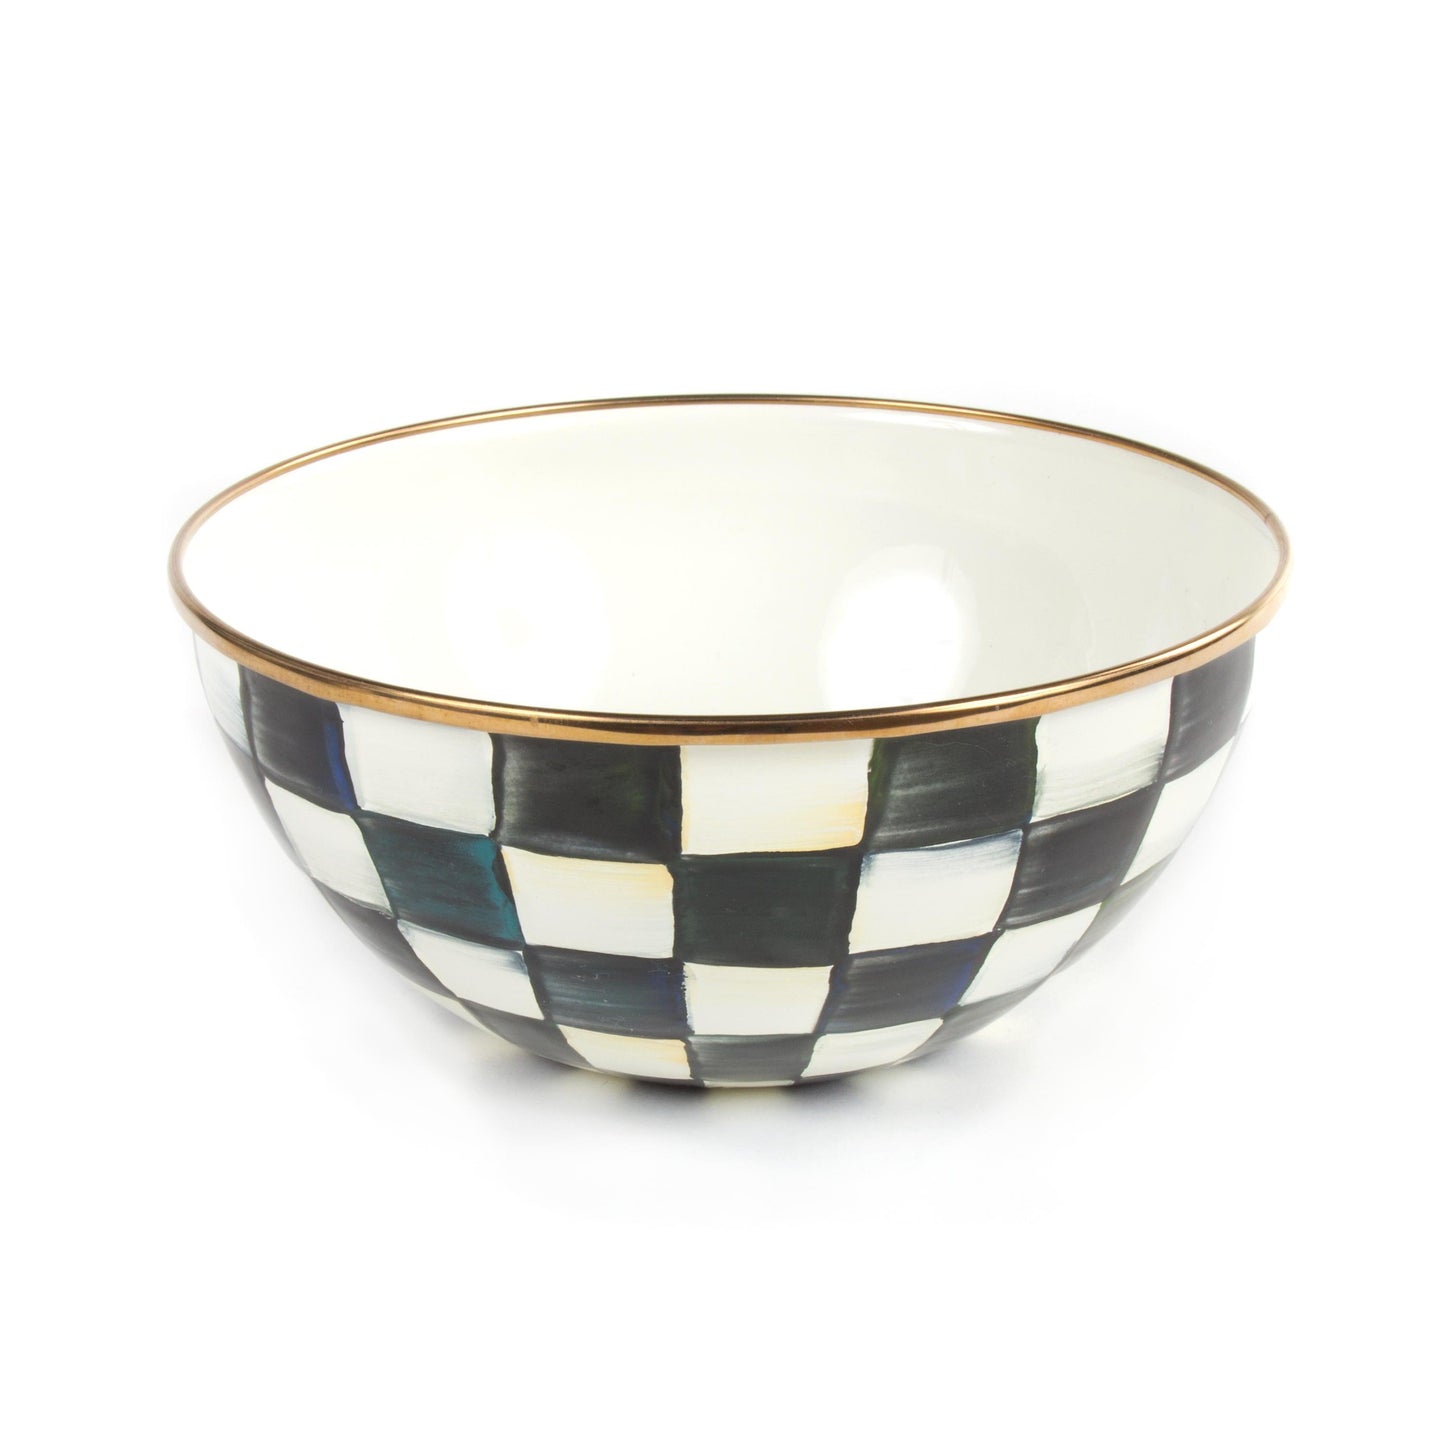 Courtly Check Everyday Bowl (Mackenzie Childs) - Gallery Gifts Online 